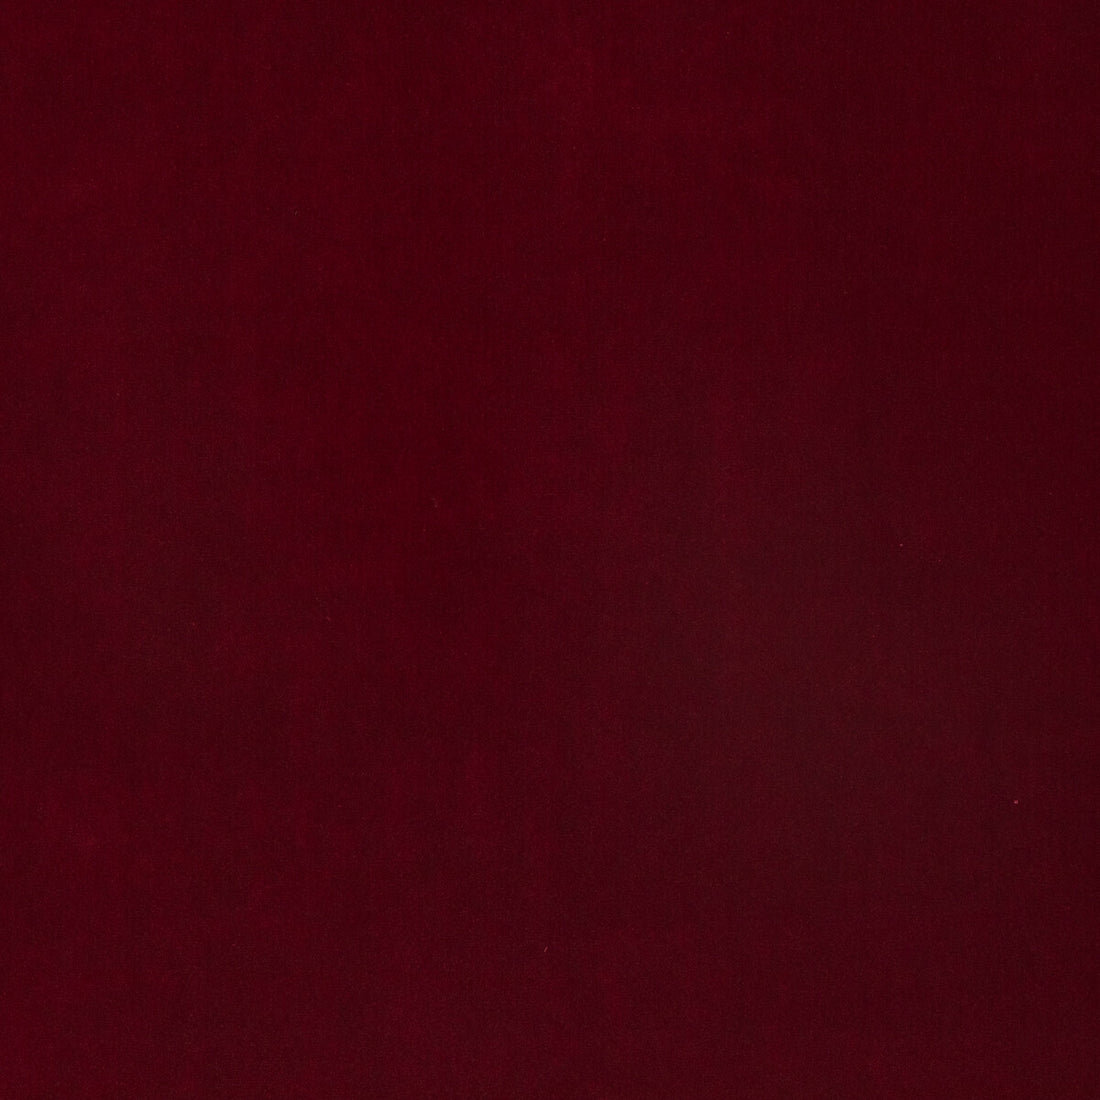 Riviera Velvet fabric in ruby color - pattern BF10841.480.0 - by G P &amp; J Baker in the Riviera Velvet collection